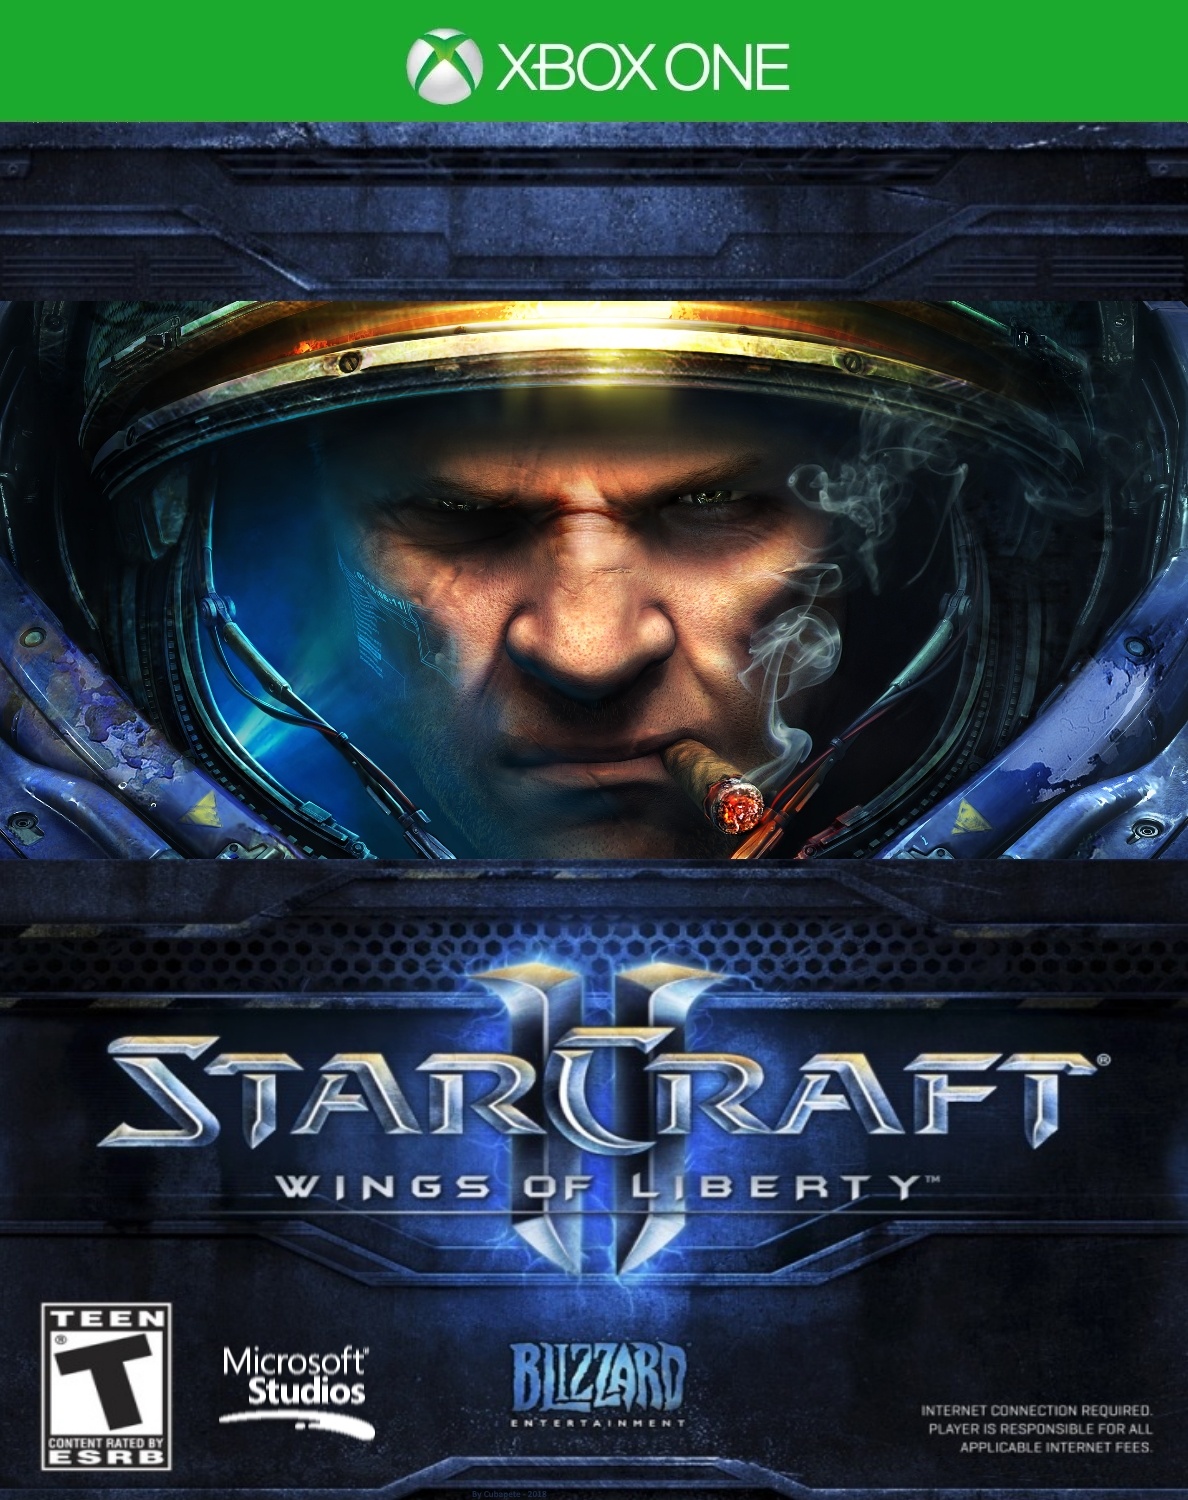 Starcraft 2: Wings of Liberty - Xbox One box cover